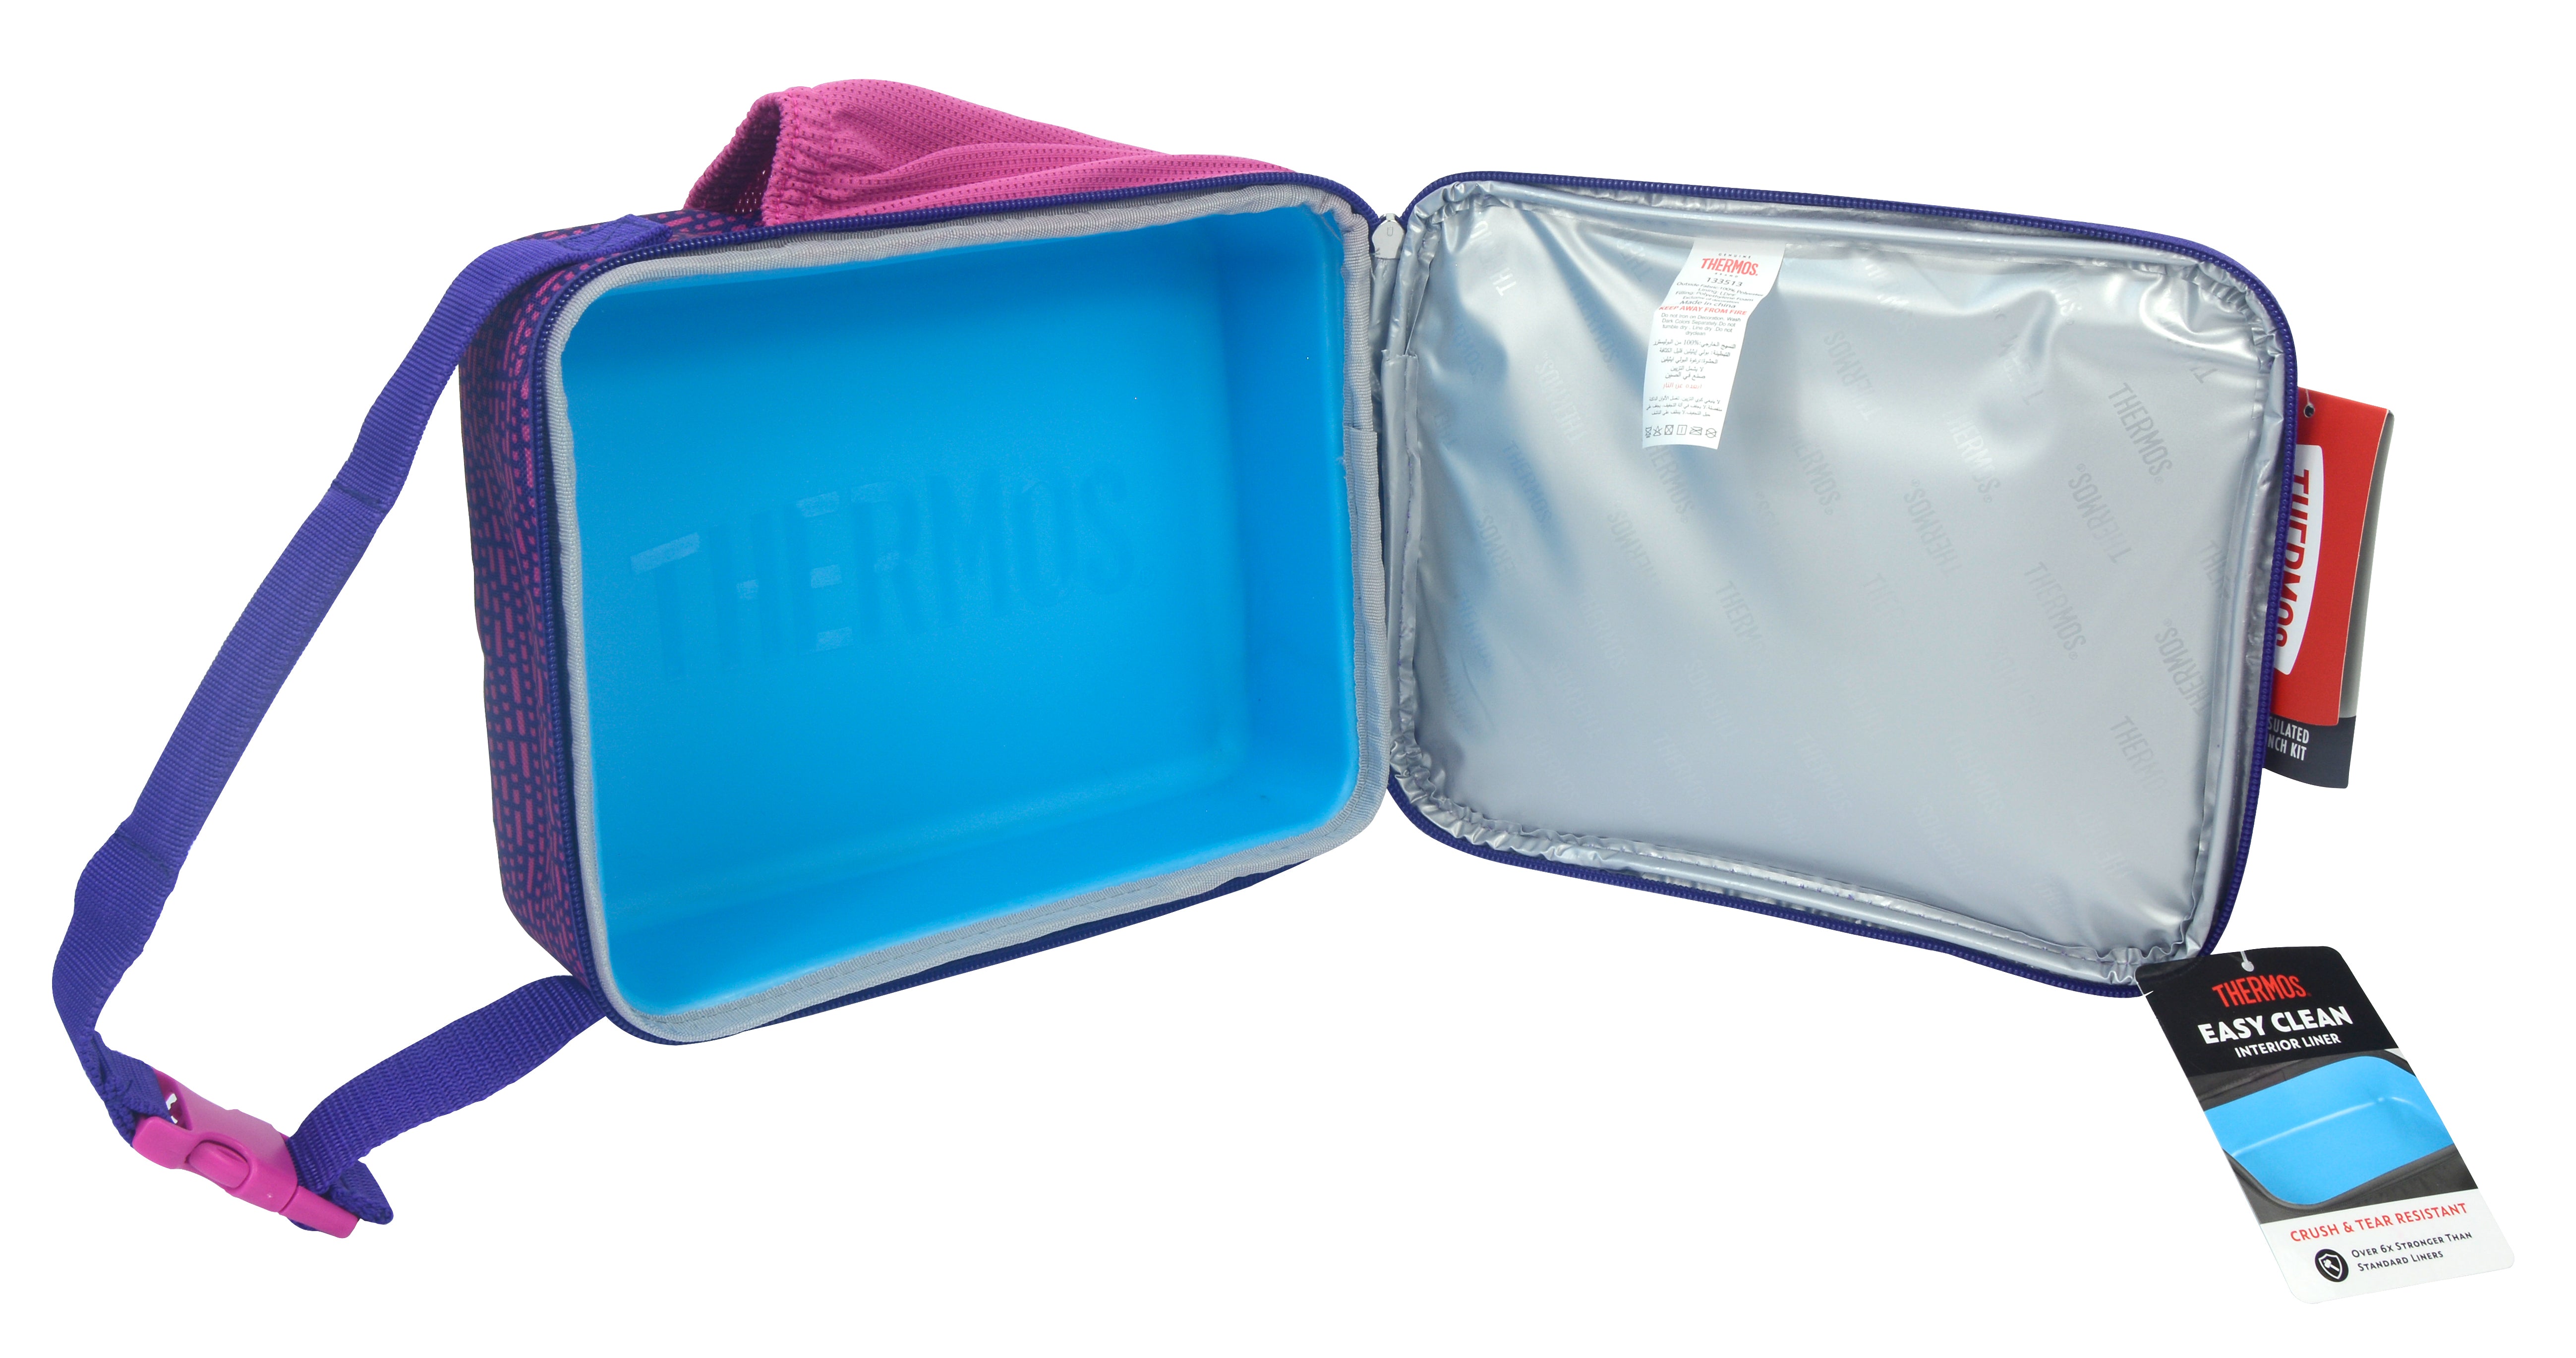 Thermos - Dual Lunch Kit with LDPE liner - Narwhals in Space